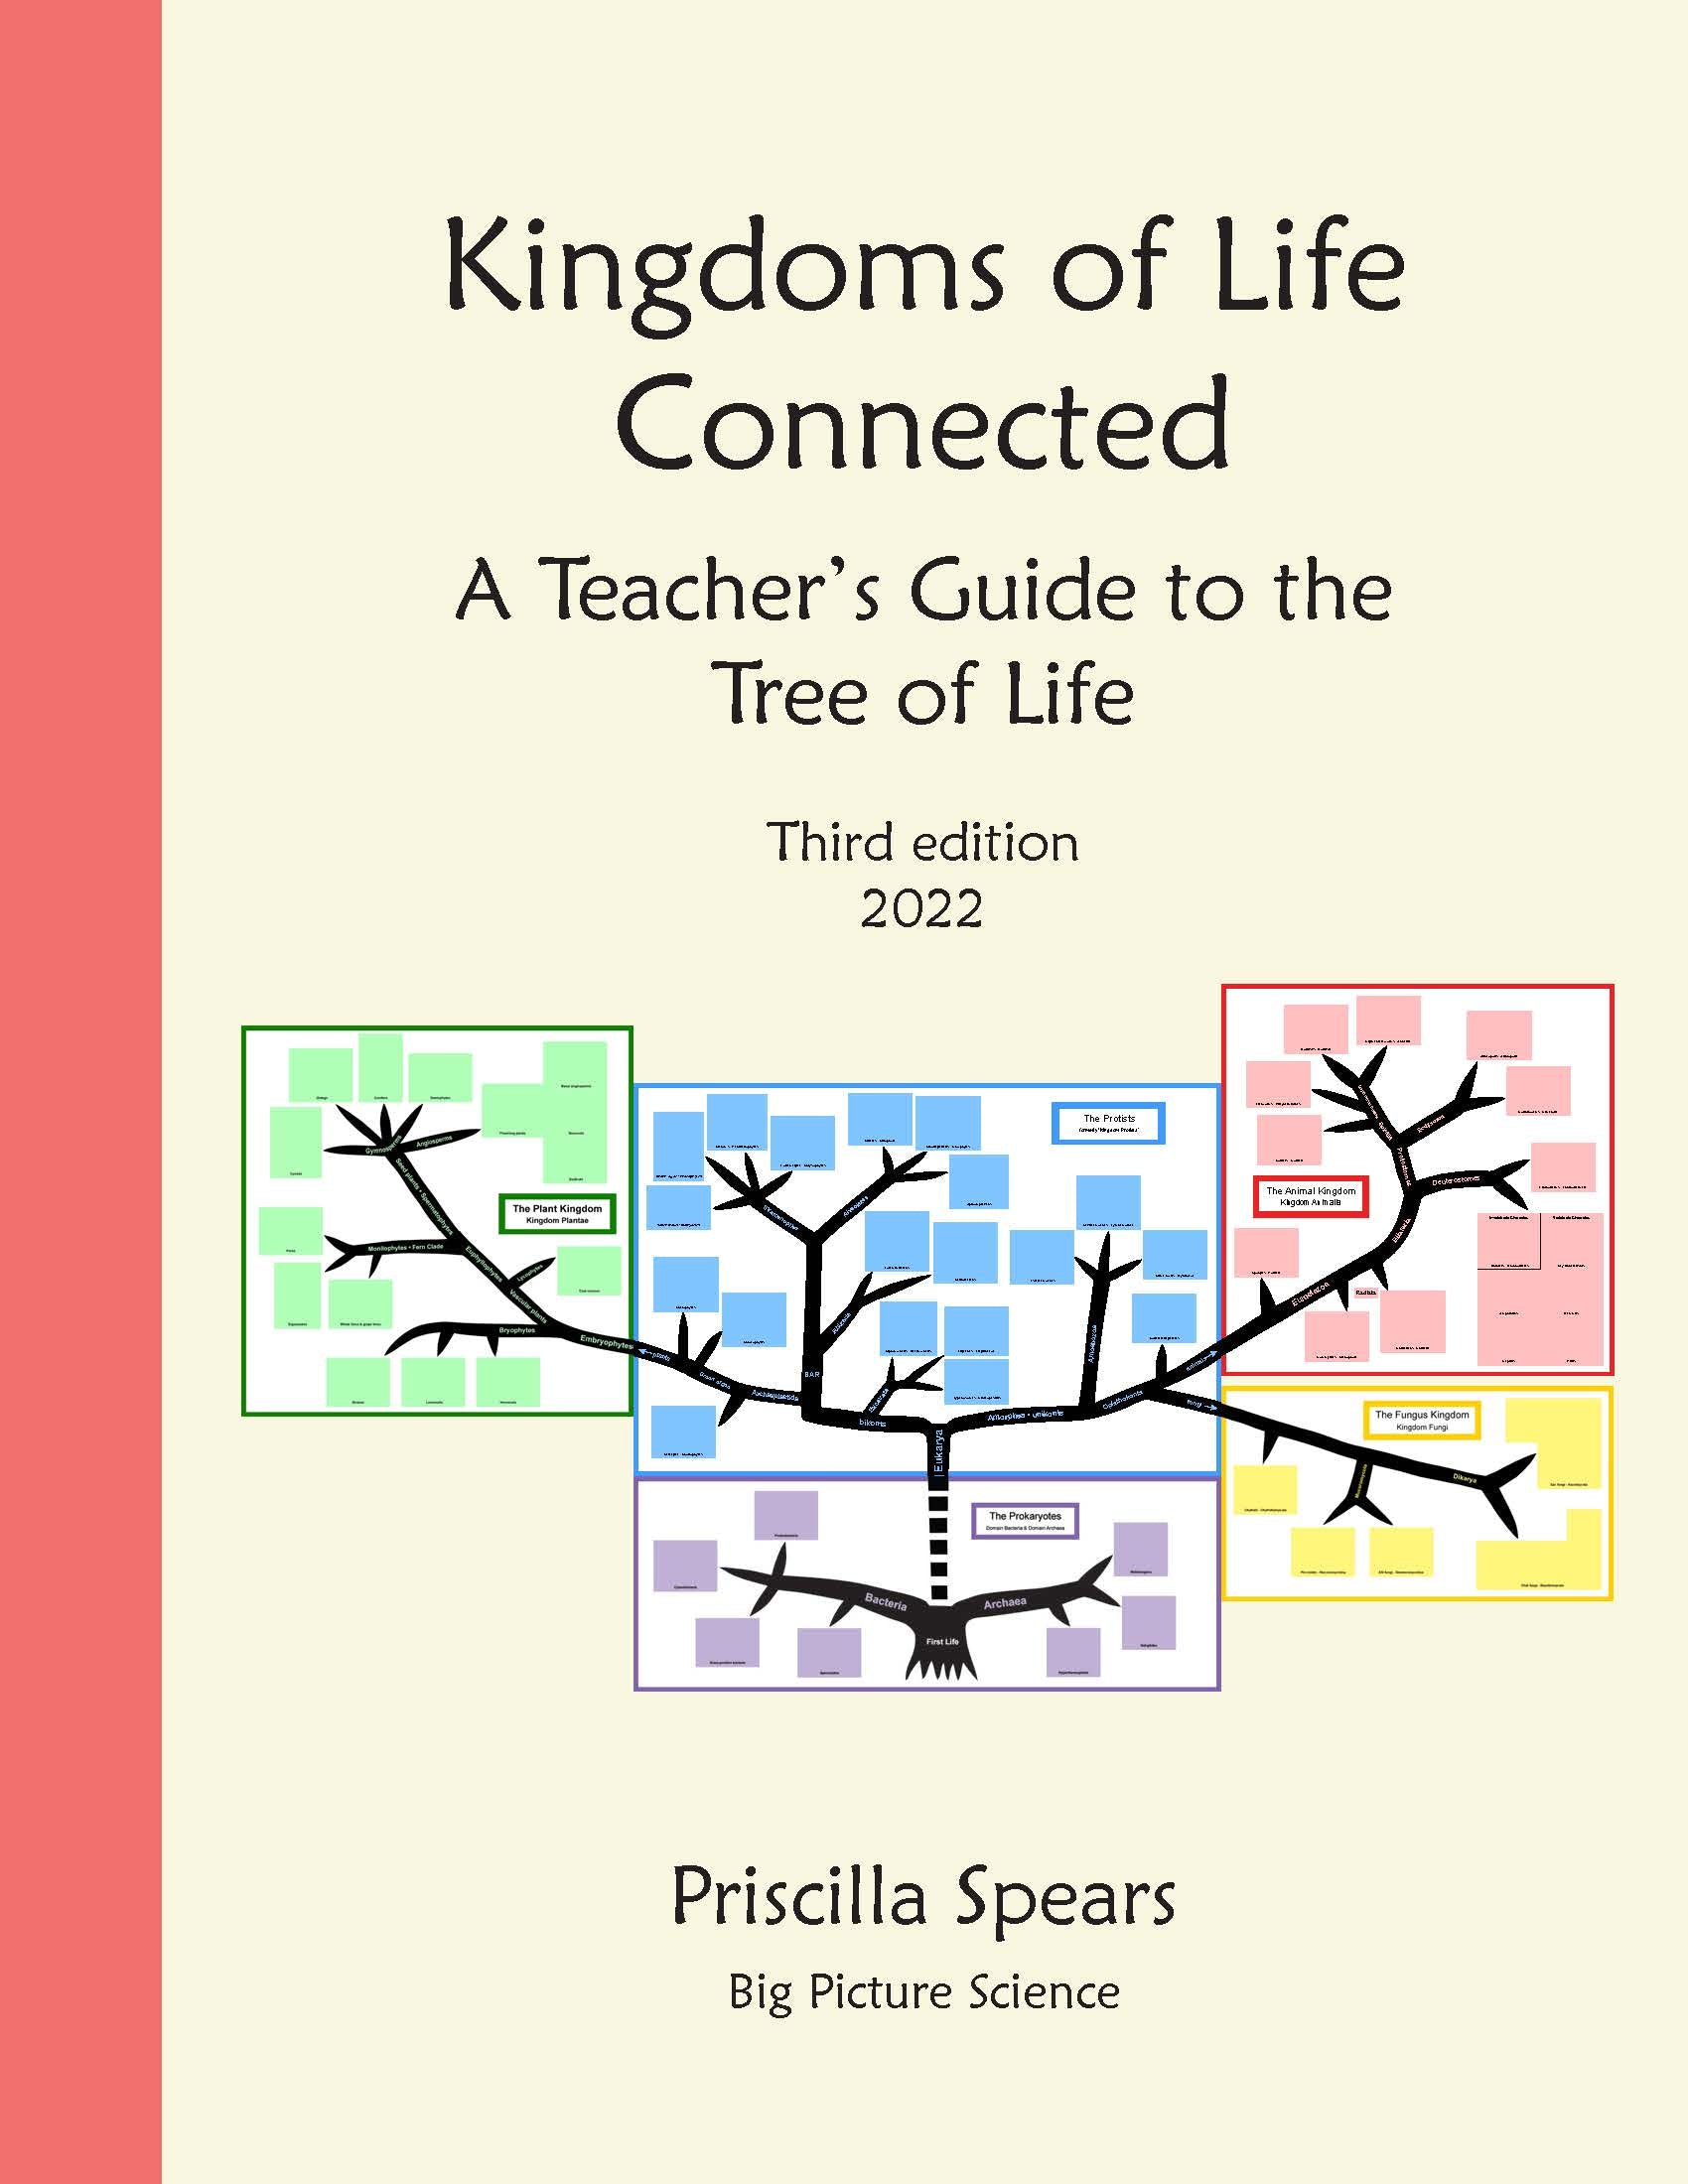 Kingdoms of Life Connected, third edition - ebook